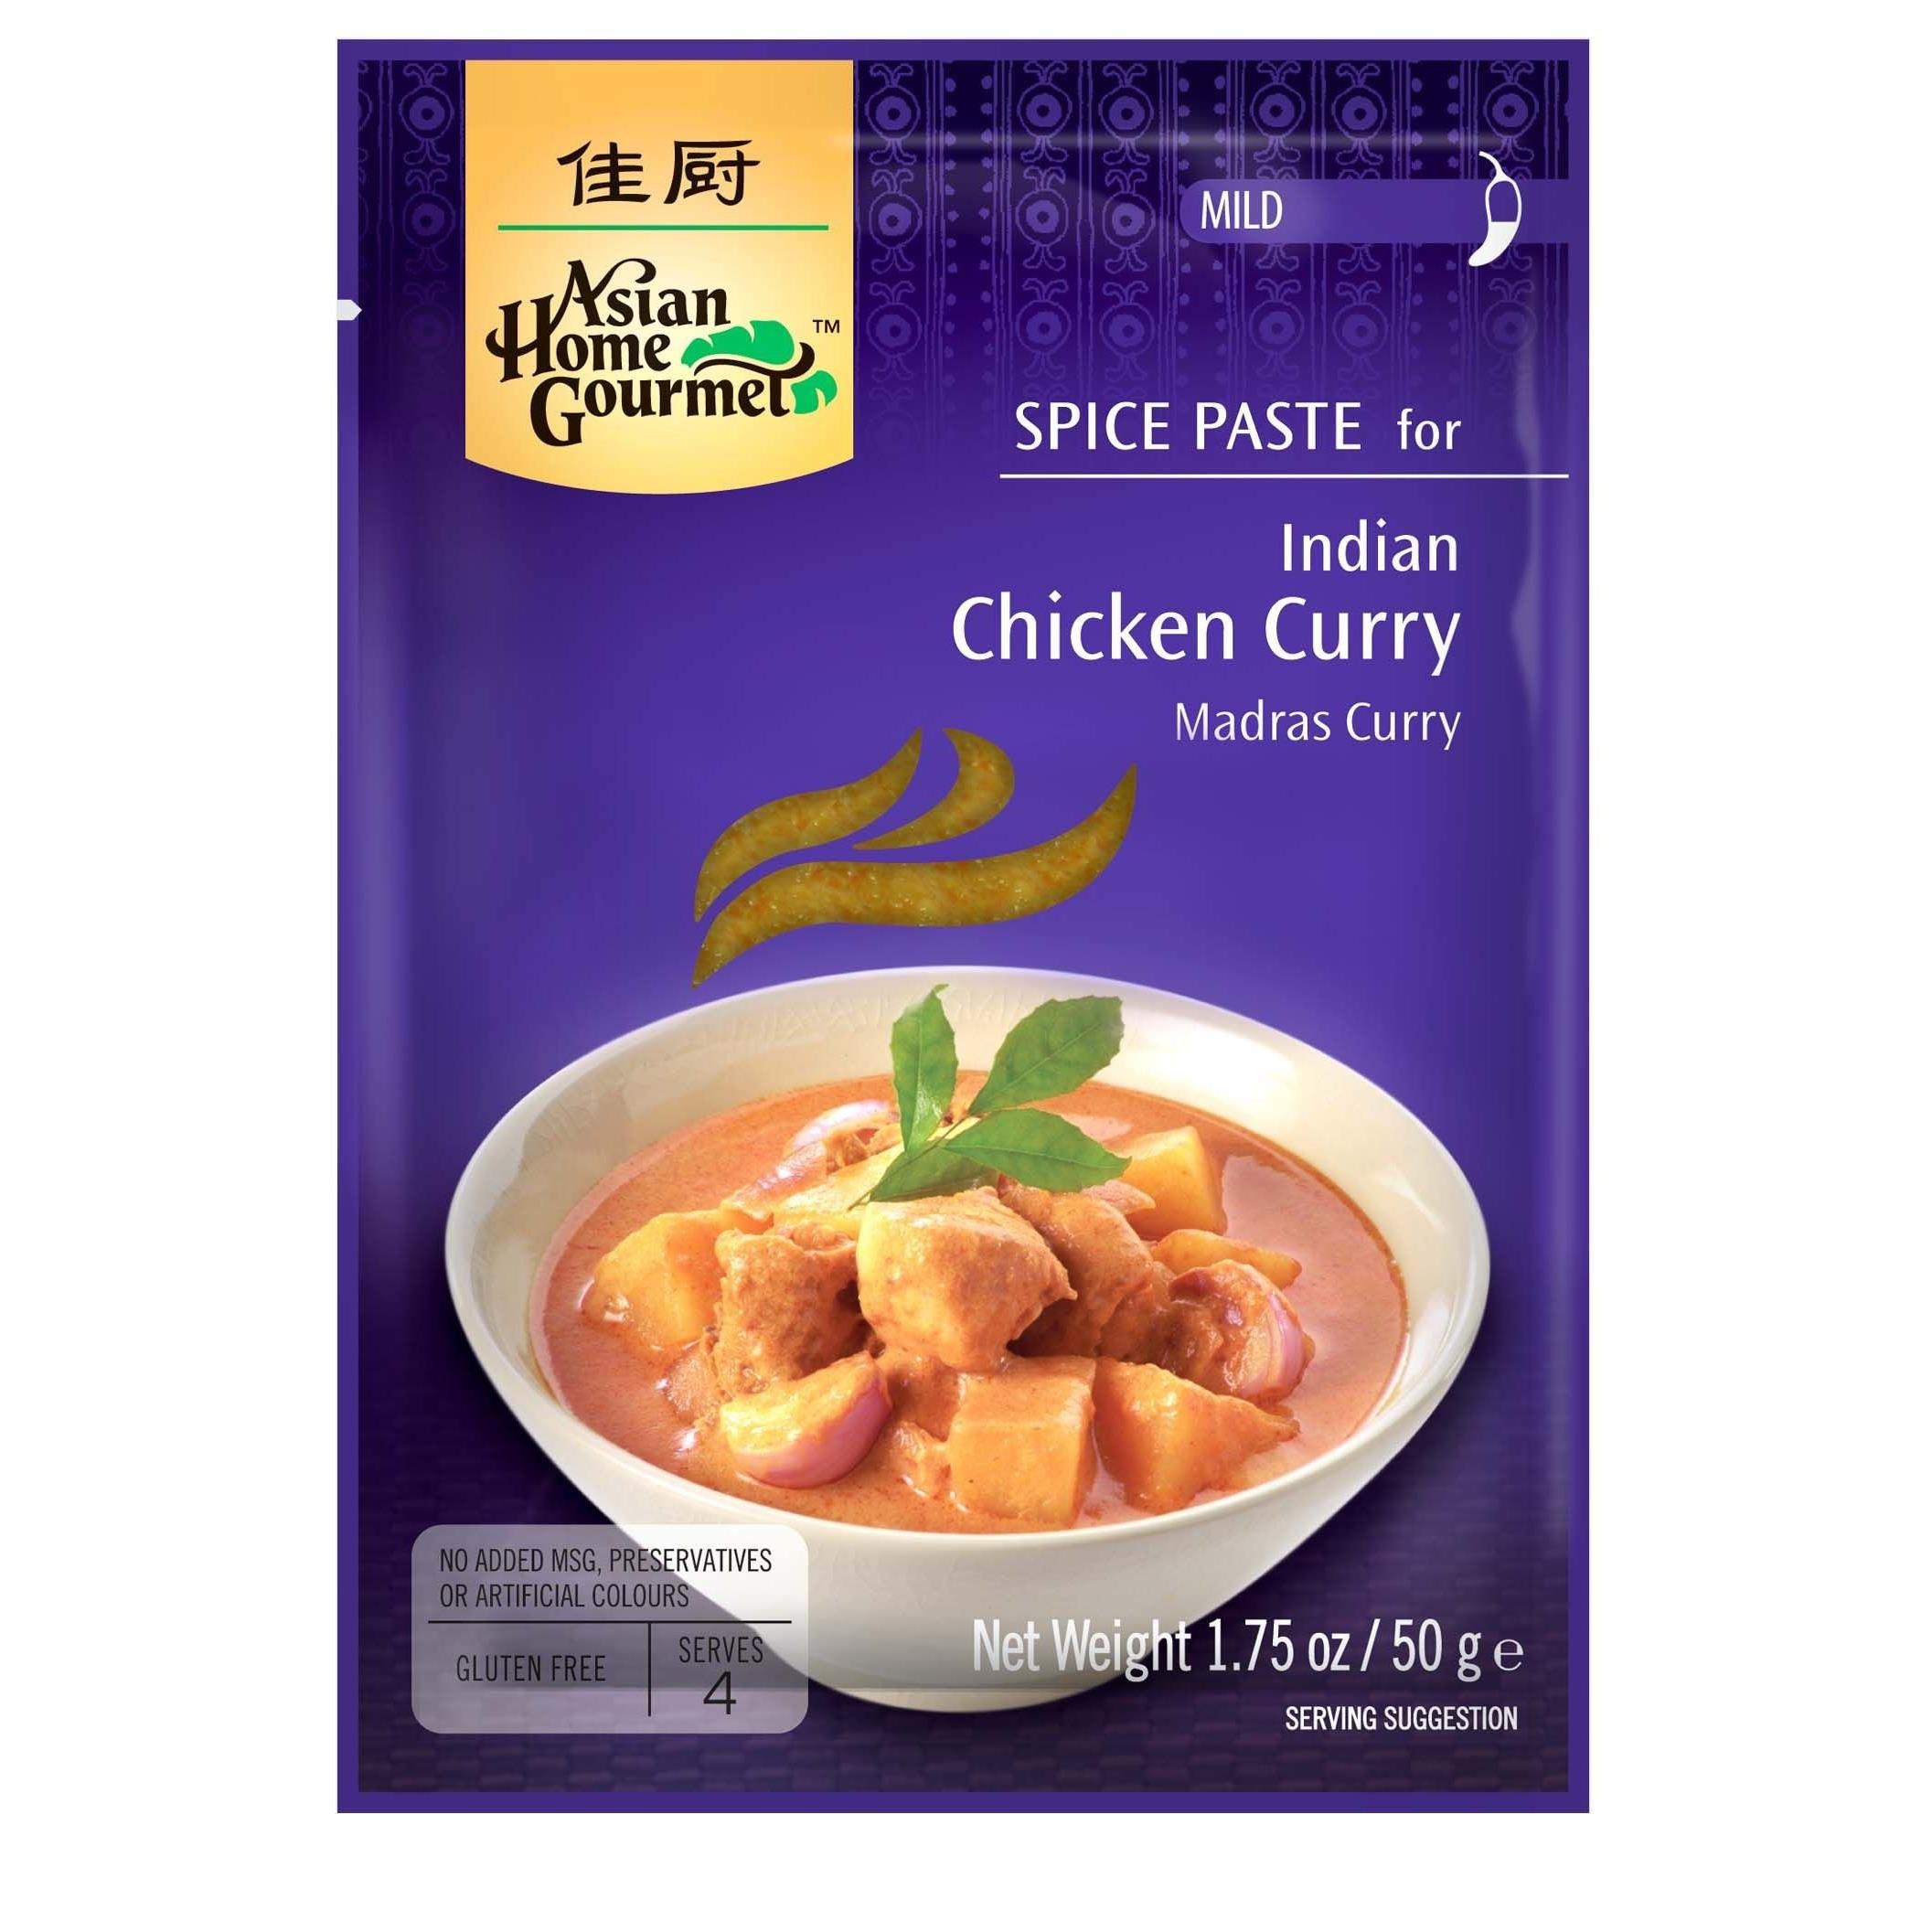 Asian Home Gourmet, Indian Spice Chicken Curry (Madras Curry) Mix, 1.75-Ounce Pouch (Pack of 12)